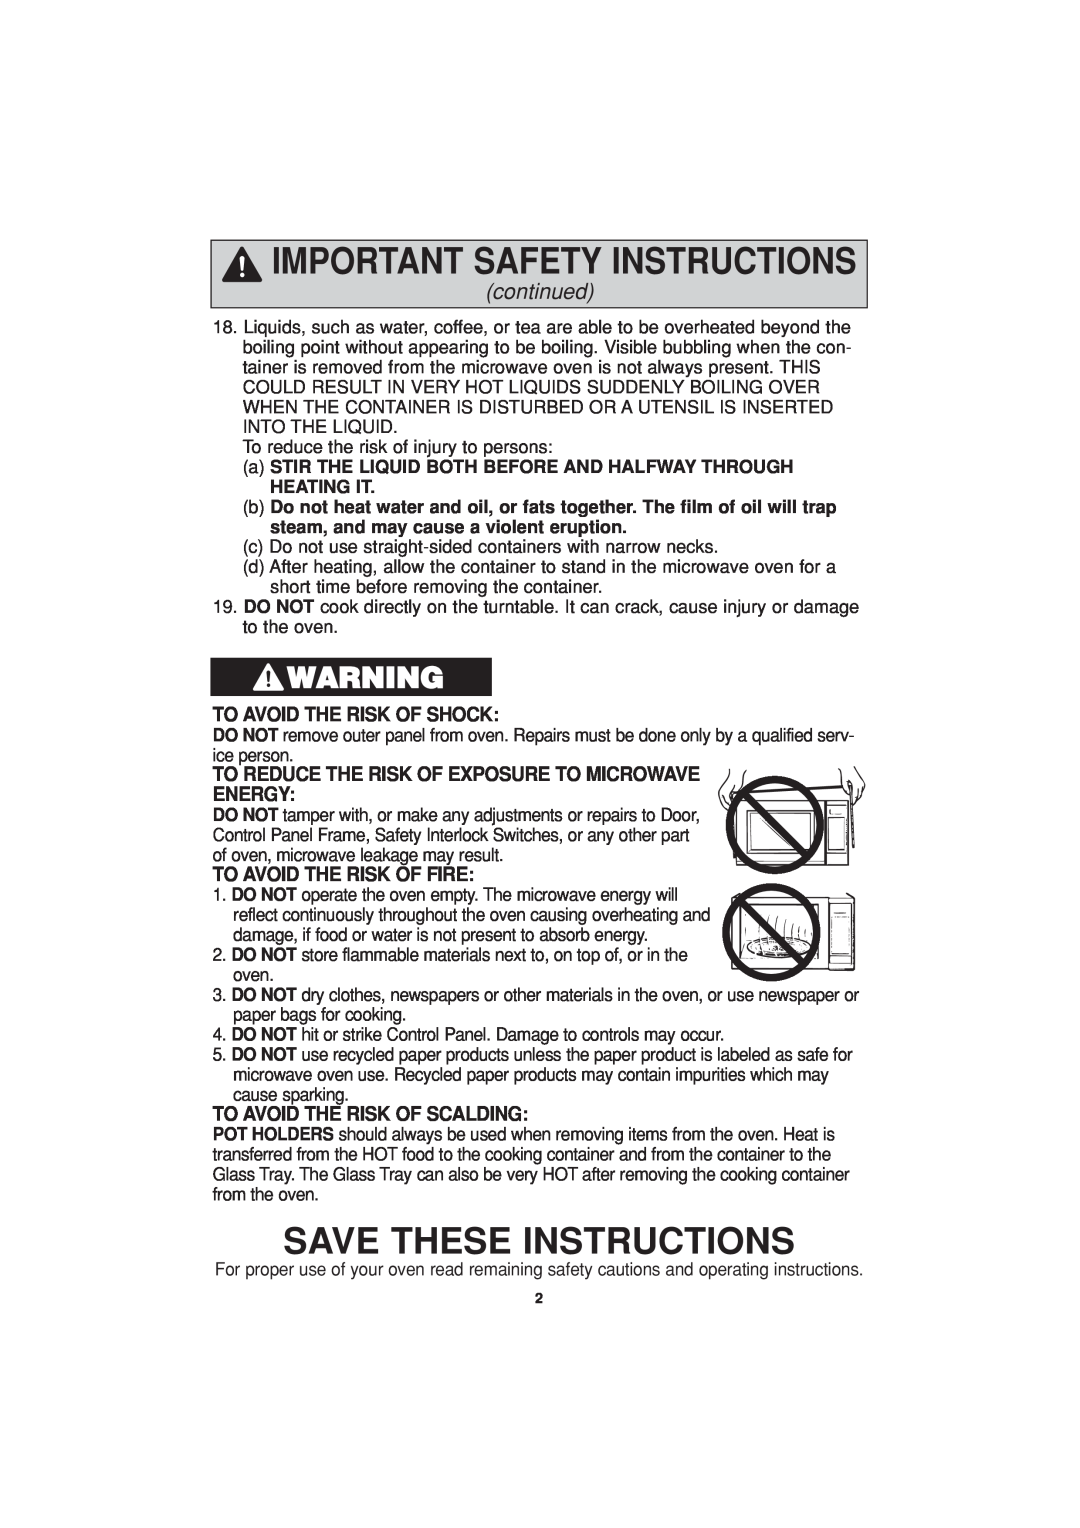 Panasonic NN-T694 Save These Instructions, continued, To Avoid The Risk Of Shock, Energy, To Avoid The Risk Of Fire 